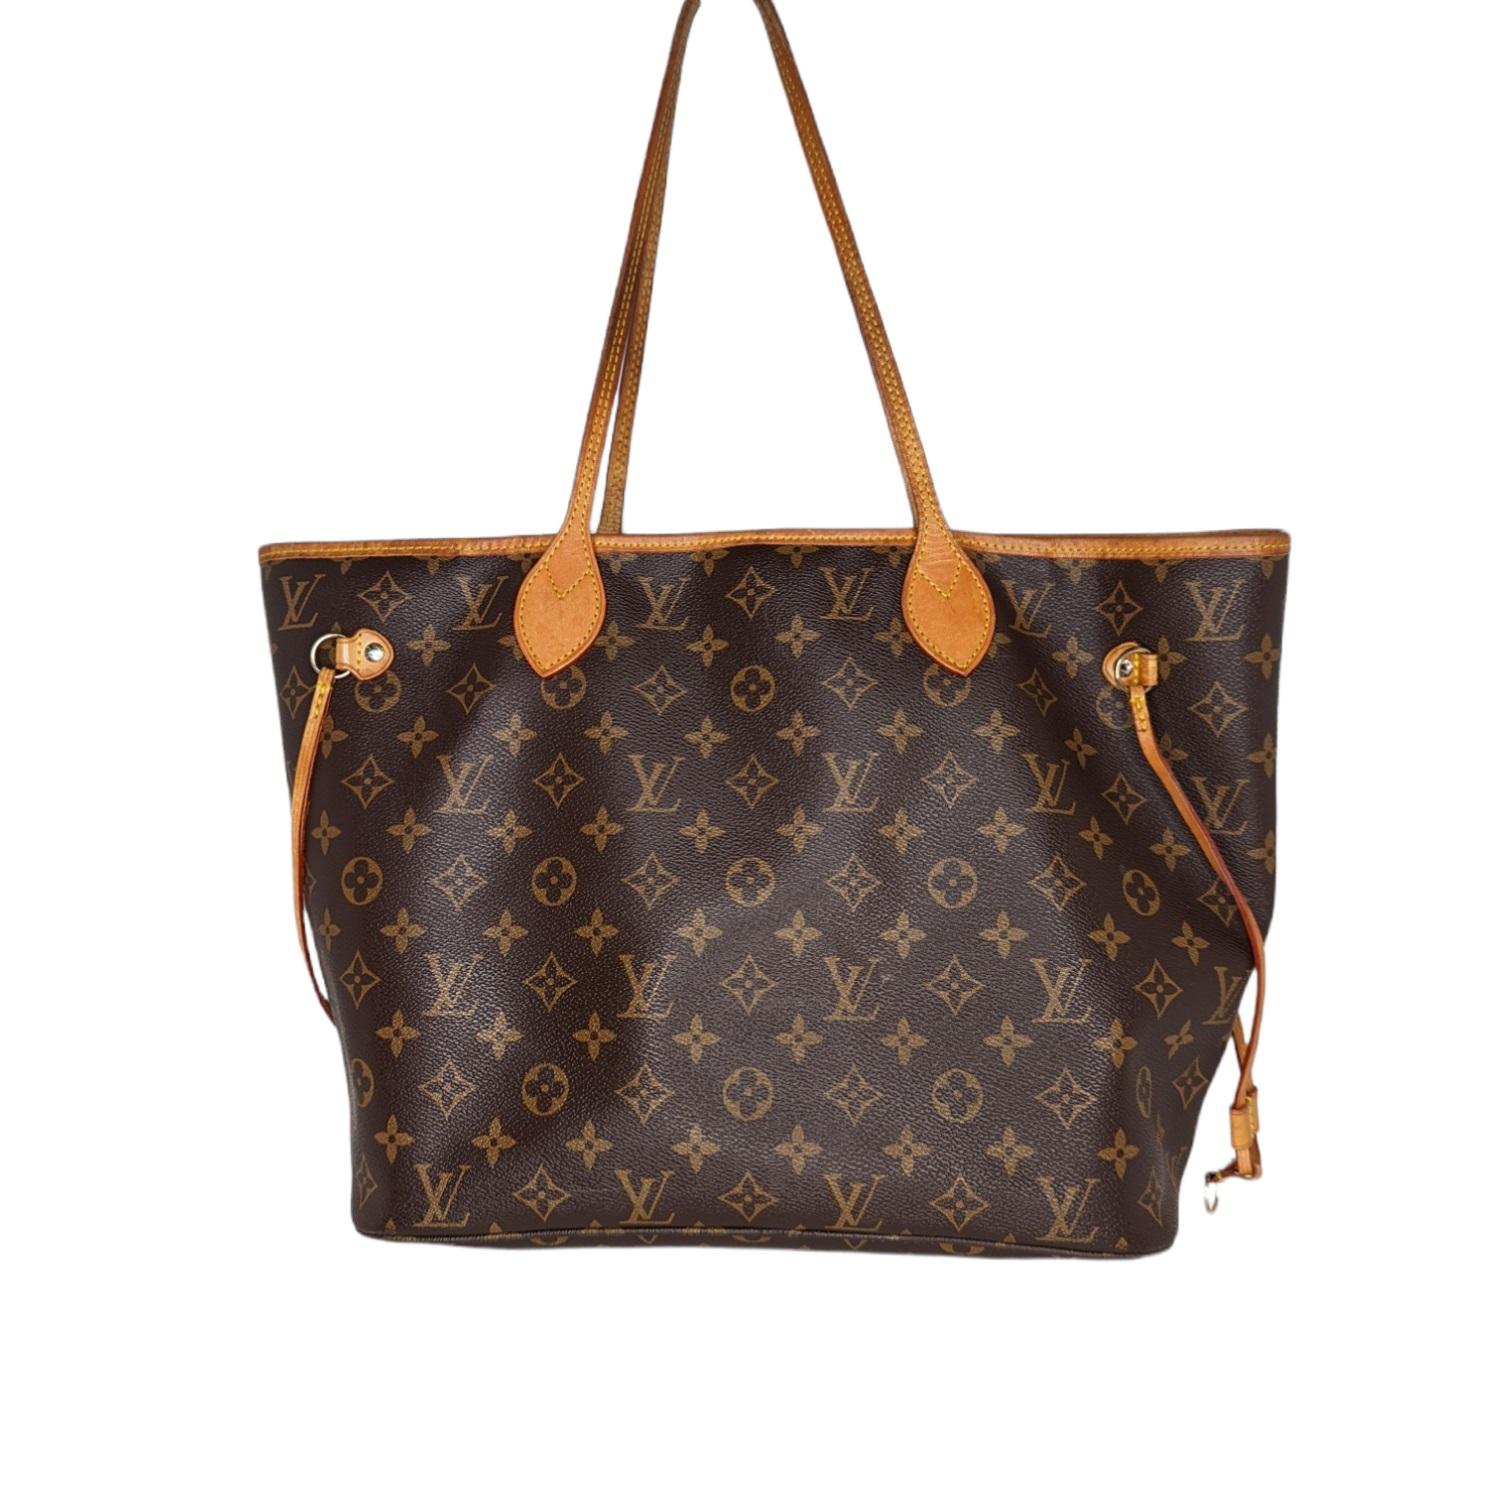 This stylish tote is crafted of classic Louis Vuitton monogram coated canvas. It features vachetta cowhide leather trim, handles, and side cinch cords with polished brass hardware. The top is open to a beige striped fabric interior, with a hanging